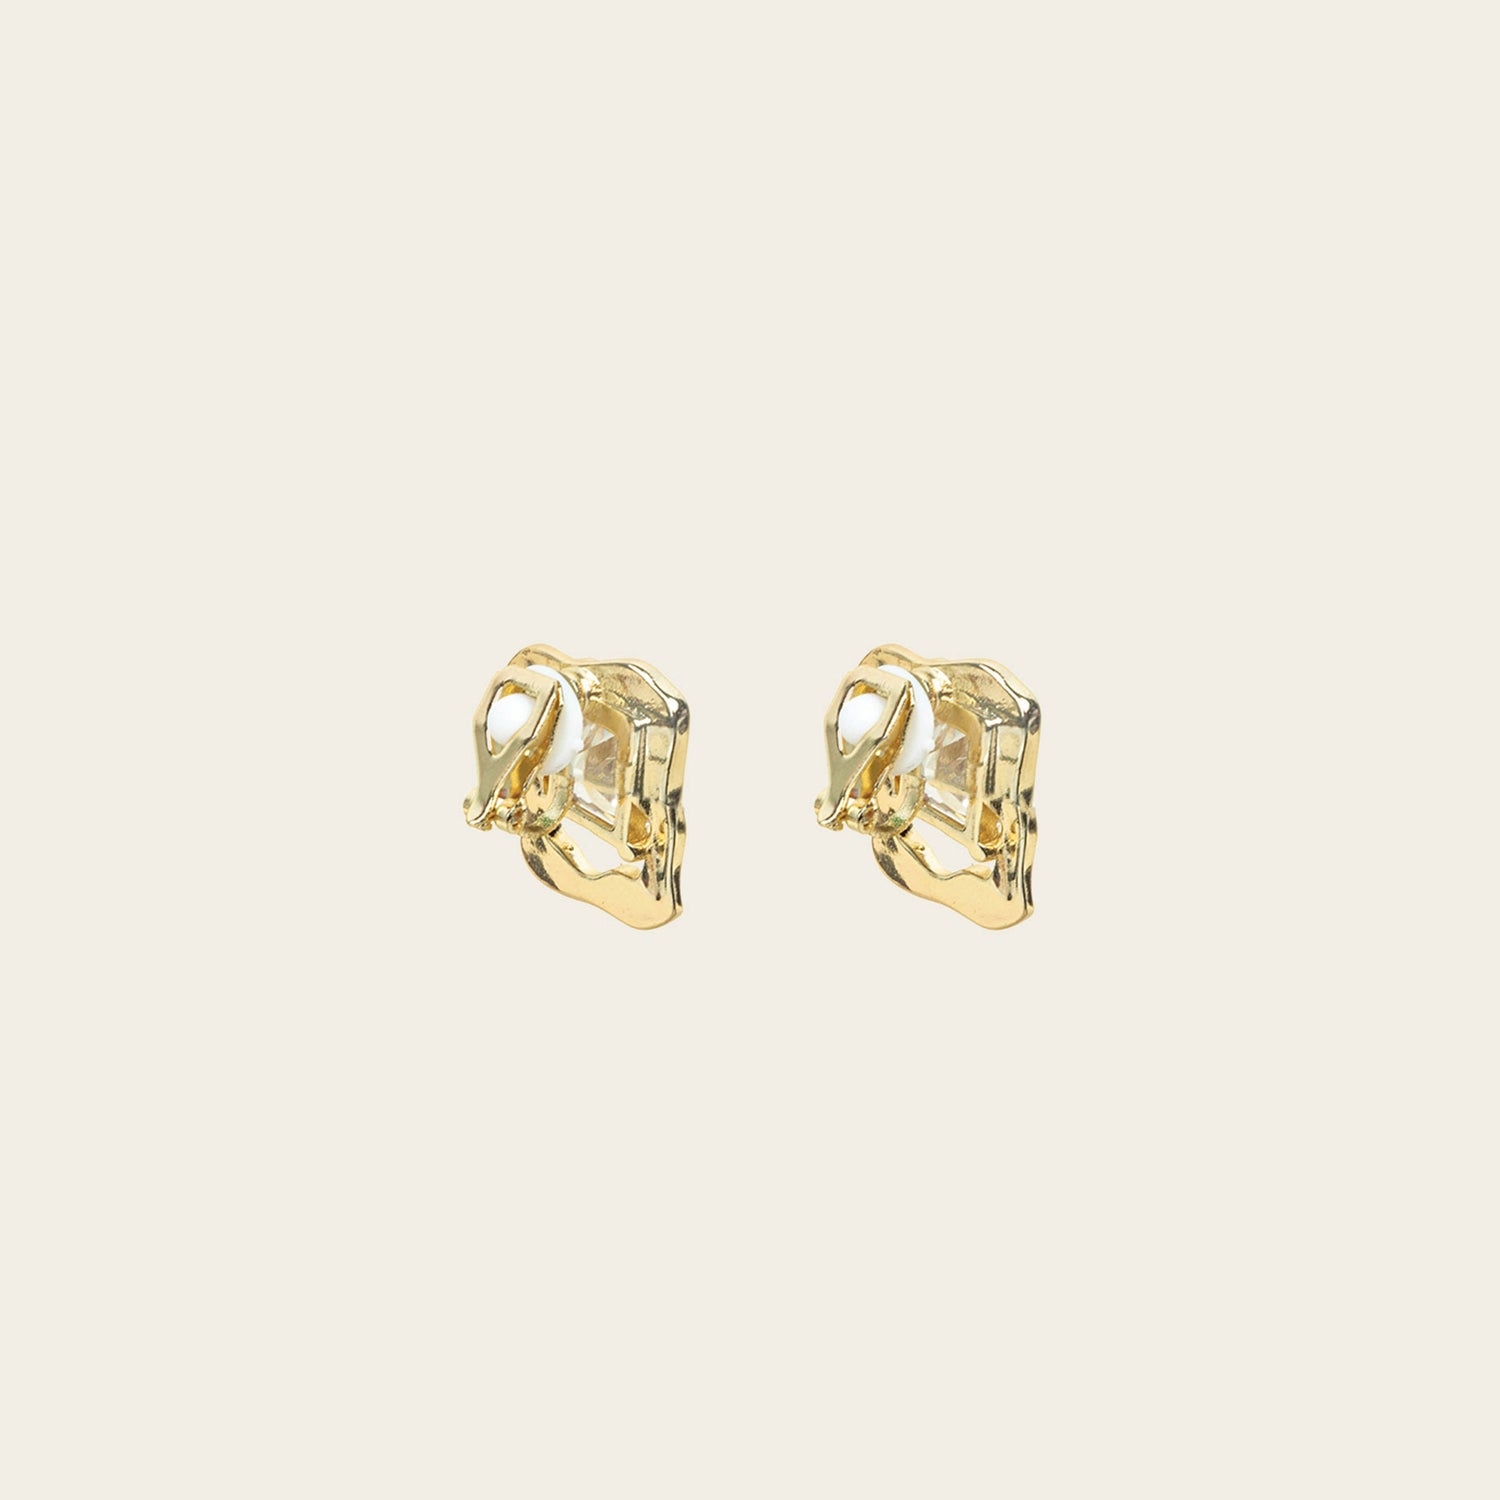 Image of the Valerie Clip On Earrings in Gold feature a padded clip-on closure for secure hold and comfortable wear up to 12 hours. These earrings are crafted with gold tone copper alloy and cubic zirconia, and can be worn by all ear types, including thick/large ears, sensitive ears, small/thin ears, and stretched/healing ears. Please note: one pair is included.